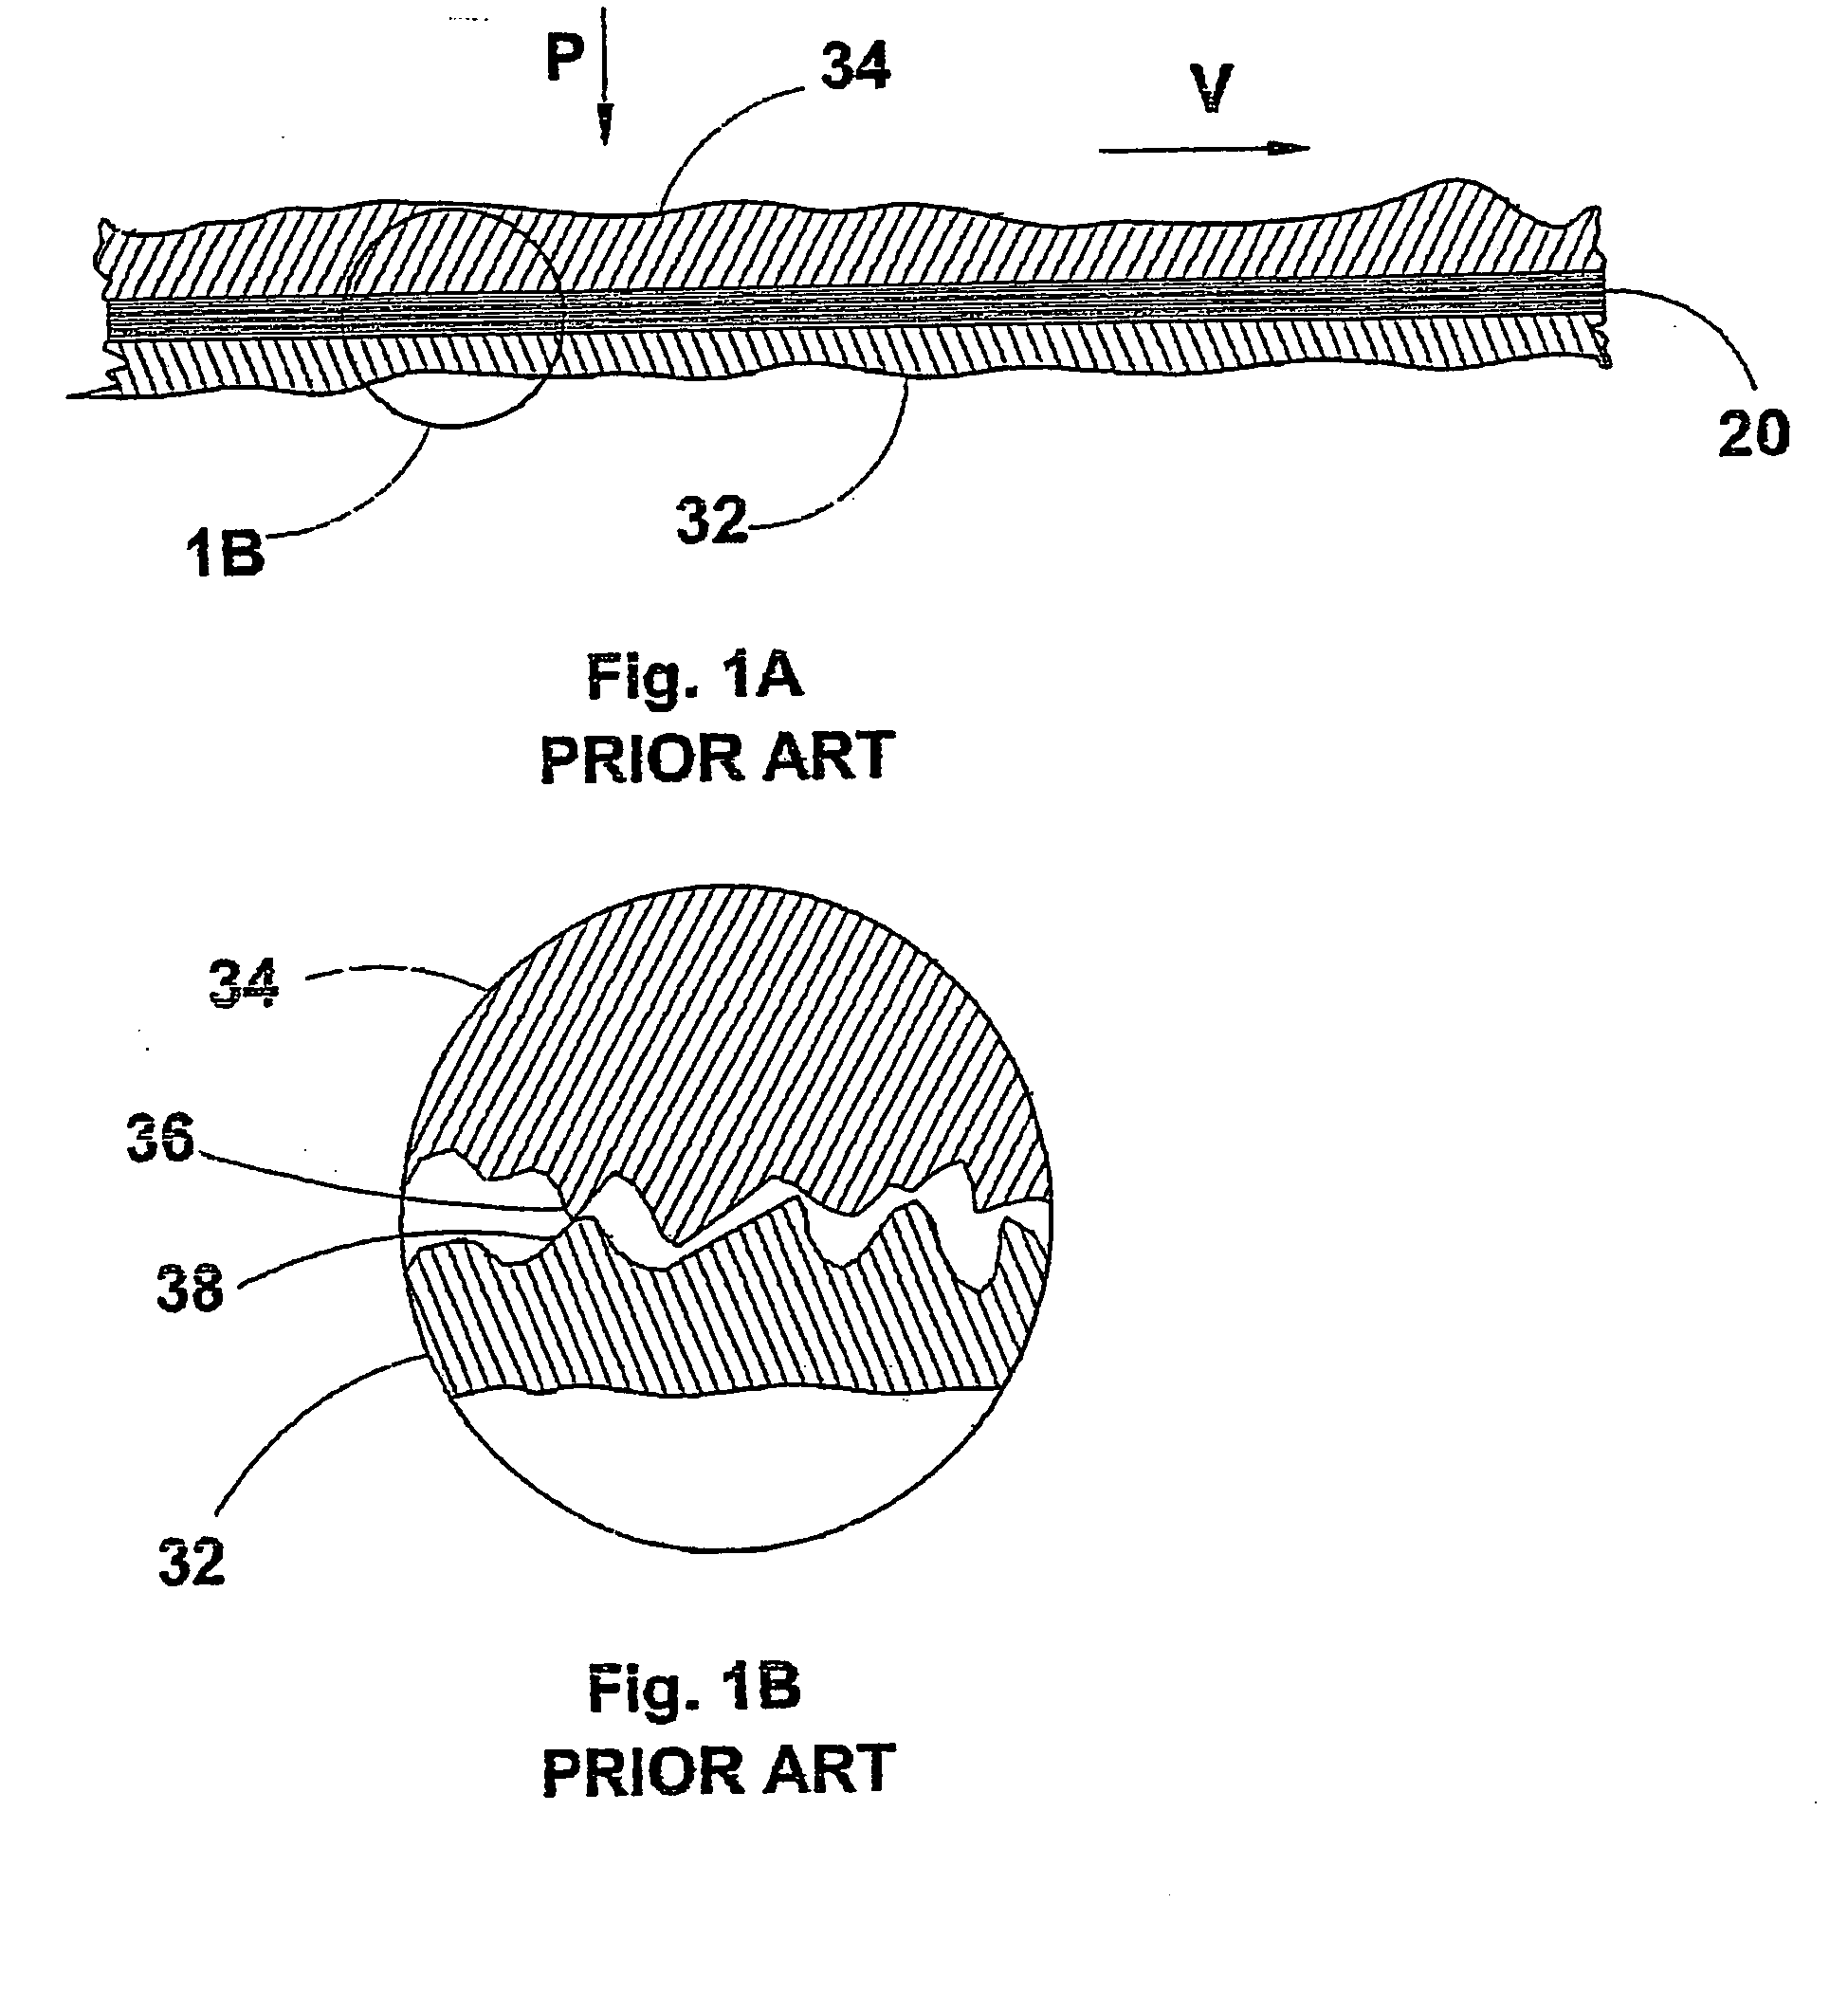 Incorporation of particulate additives into metal working surfaces